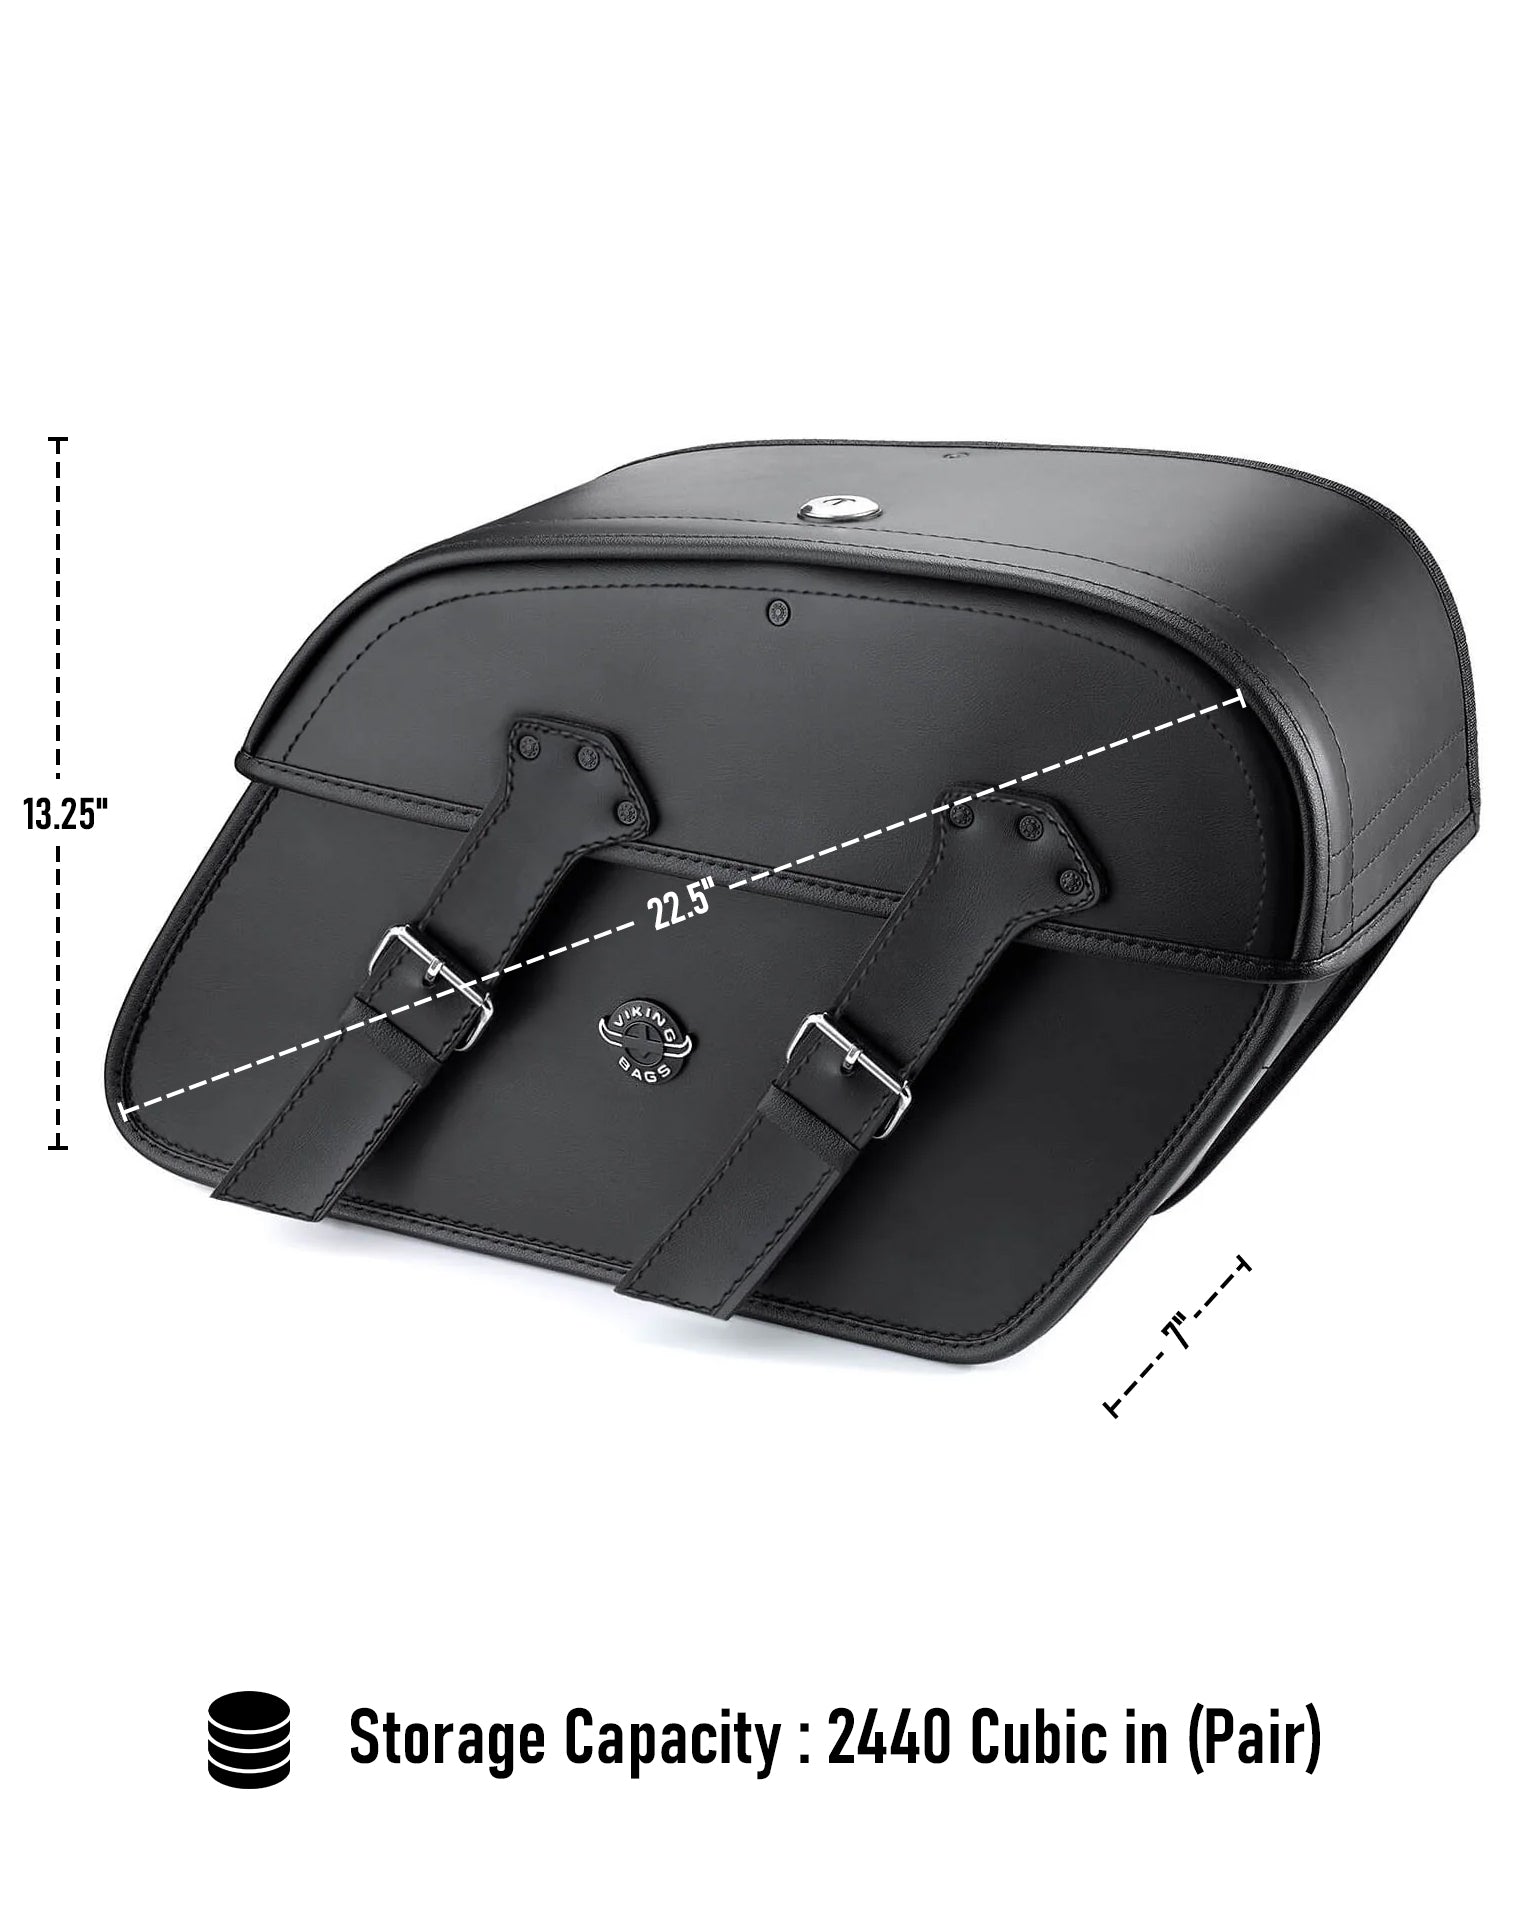 Viking Raven Extra Large Suzuki Boulevard M95 Vz1600 Leather Motorcycle Saddlebags Can Store Your Ridings Gears